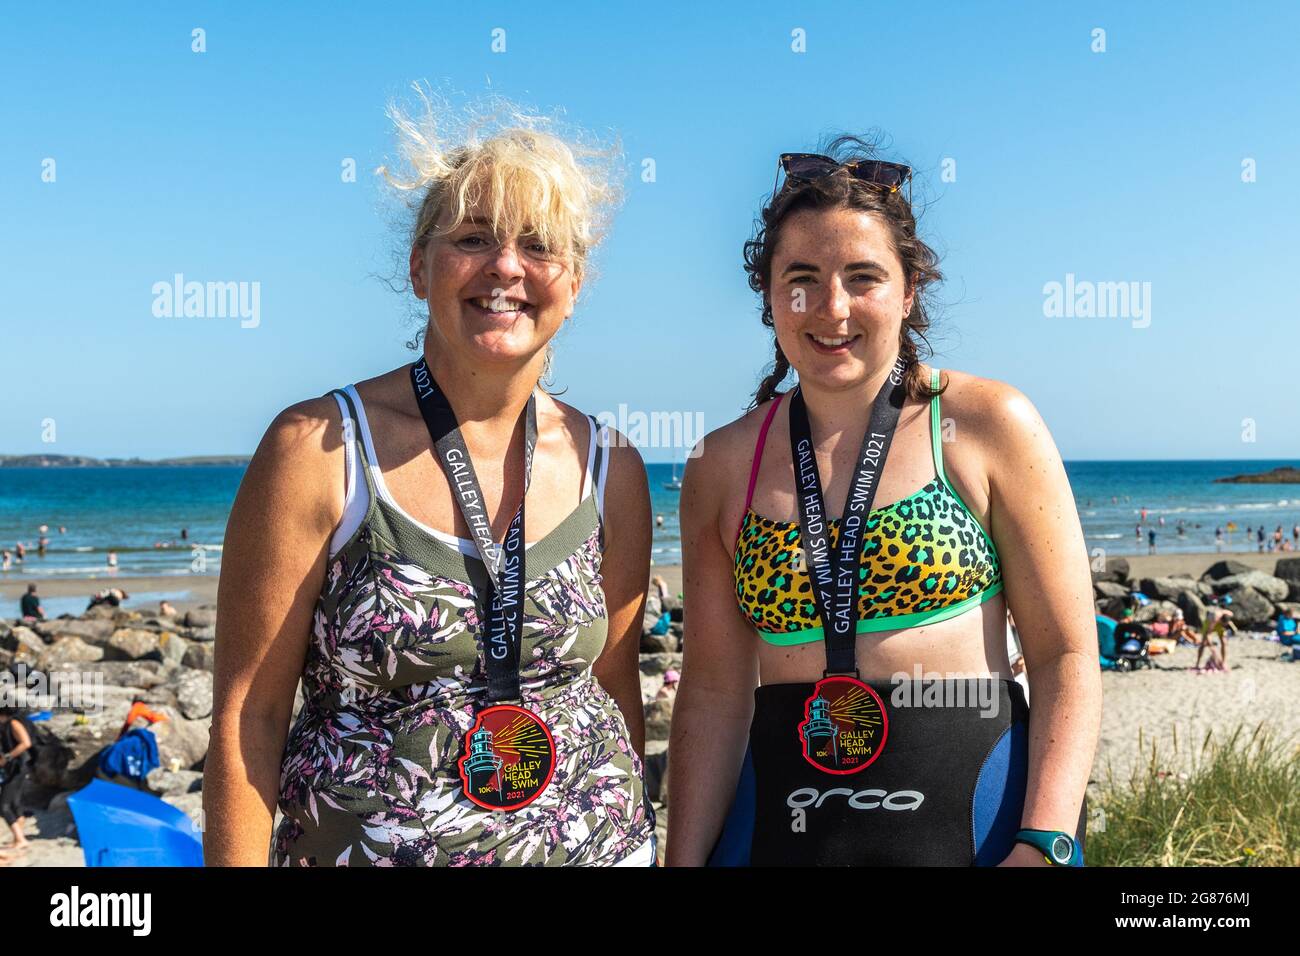 Rosscarbery, West Cork, Ireland. 17th July, 2021. Temperatures hit 27C in Rosscarbery today with The Warren Beach packed with sun seekers. The Galley Head swimtook place today where competitors swam from Red Strand to The Warren Beach, a distance of 10KM. Pictured after the swim with their medals are Hetty Walsh, Clonakilty and Jane O'Donovan, Ballineen. Credit: AG News/Alamy Live News Stock Photo